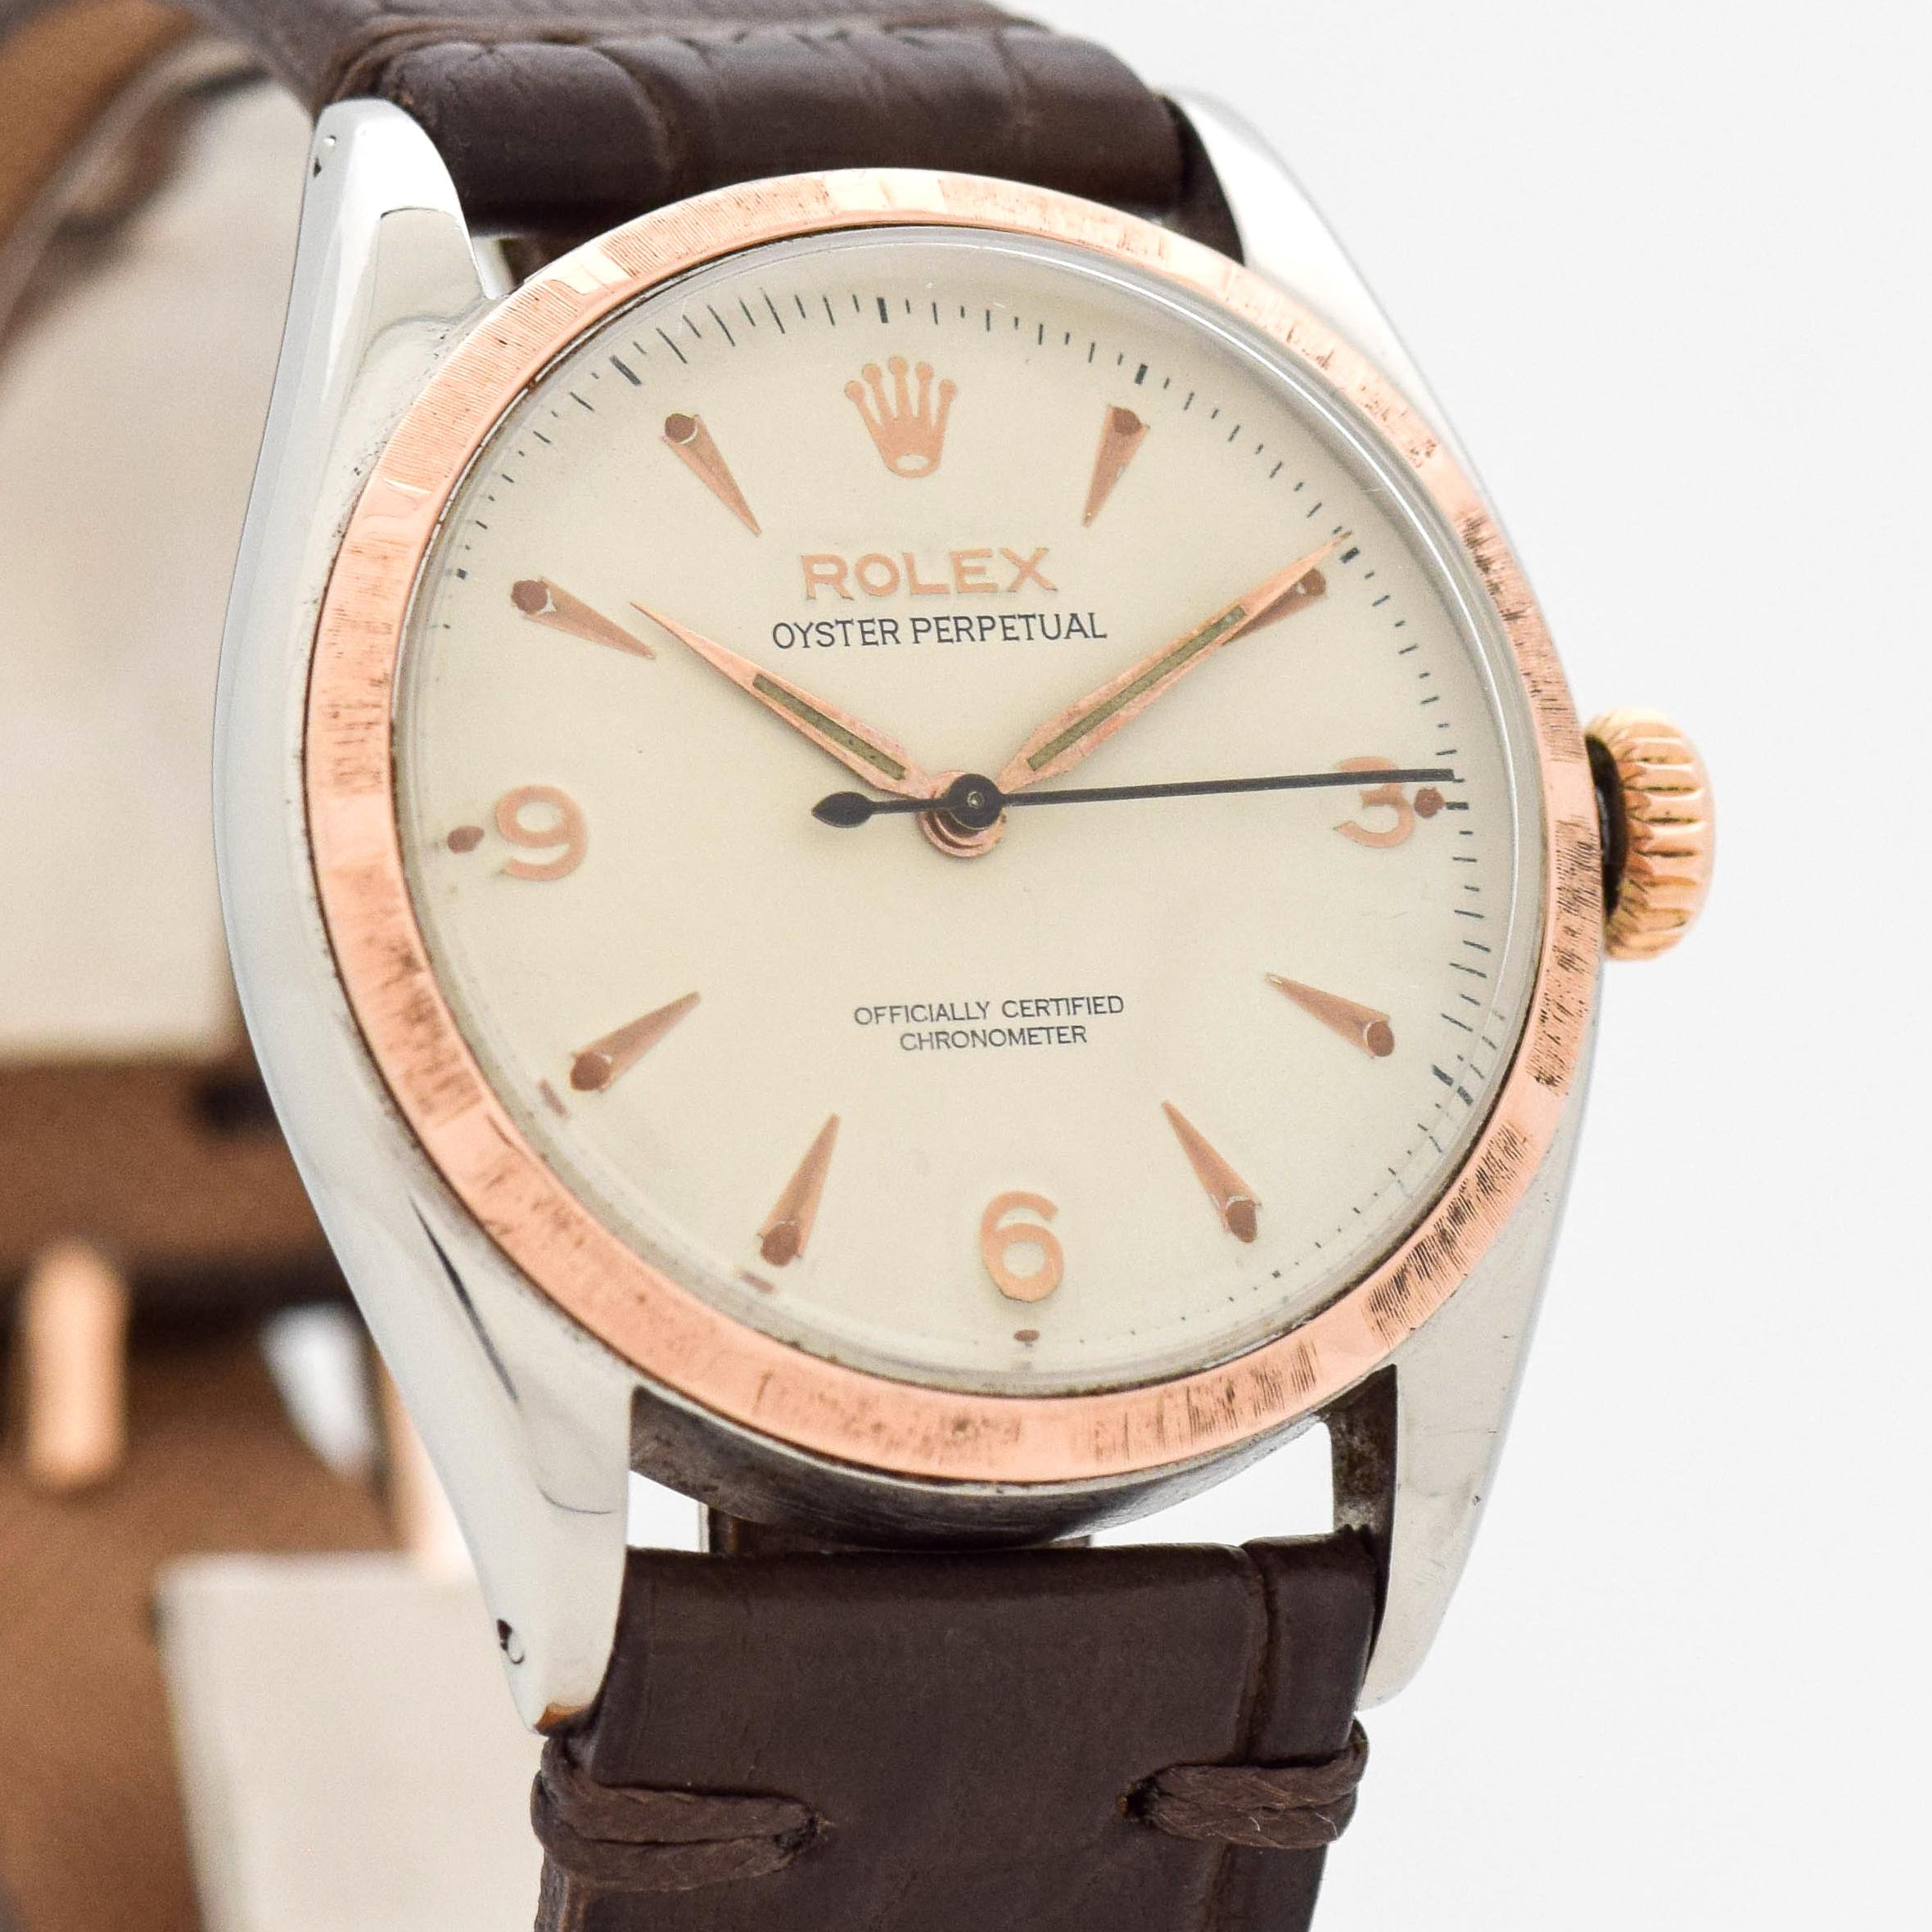 1953 Vintage Rolex Oyster Perpetual VERY EARLY Ref. 6085 Two Tone 14k Rose Gold Machined Bezel and Stainless Steel Case watch with White Dial with Applied Rose Color Arabic 3, 6, and 9 with Elongated Beveled Arrow Markers. 34mm x 39mm lug to lug